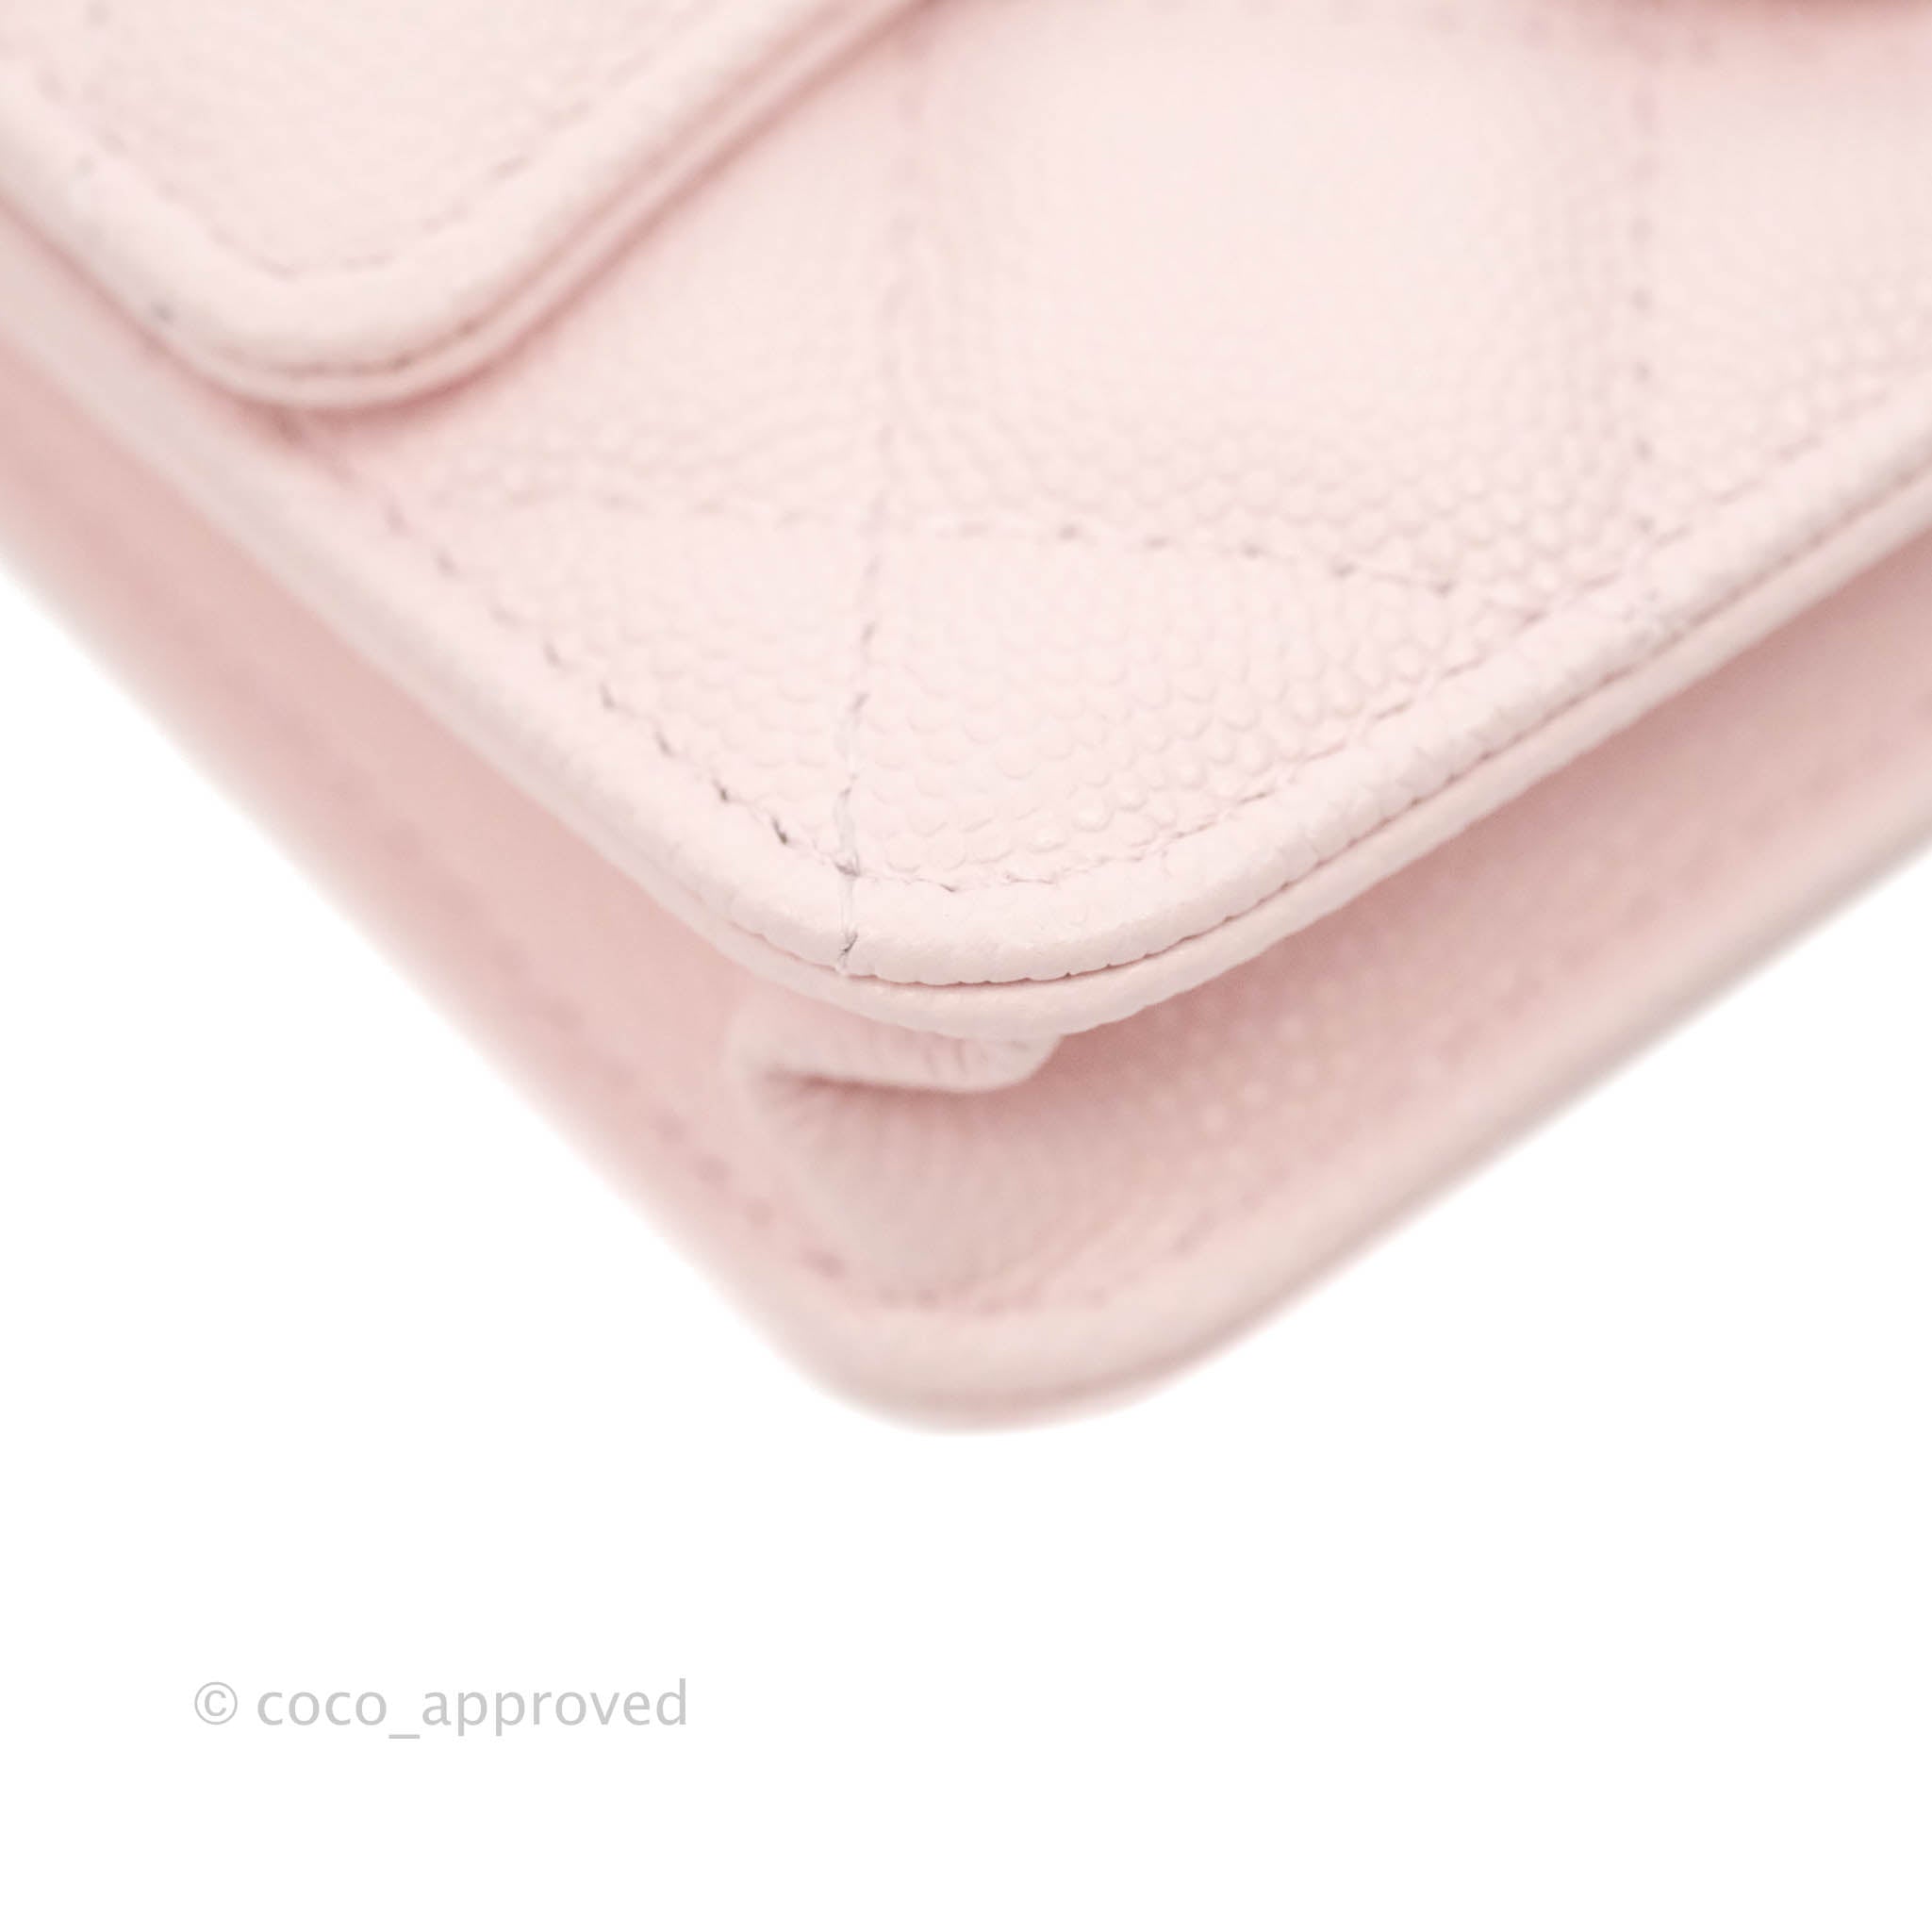 Chanel 22P Small Compact Wallet, Caviar, Pink GHW - Laulay Luxury